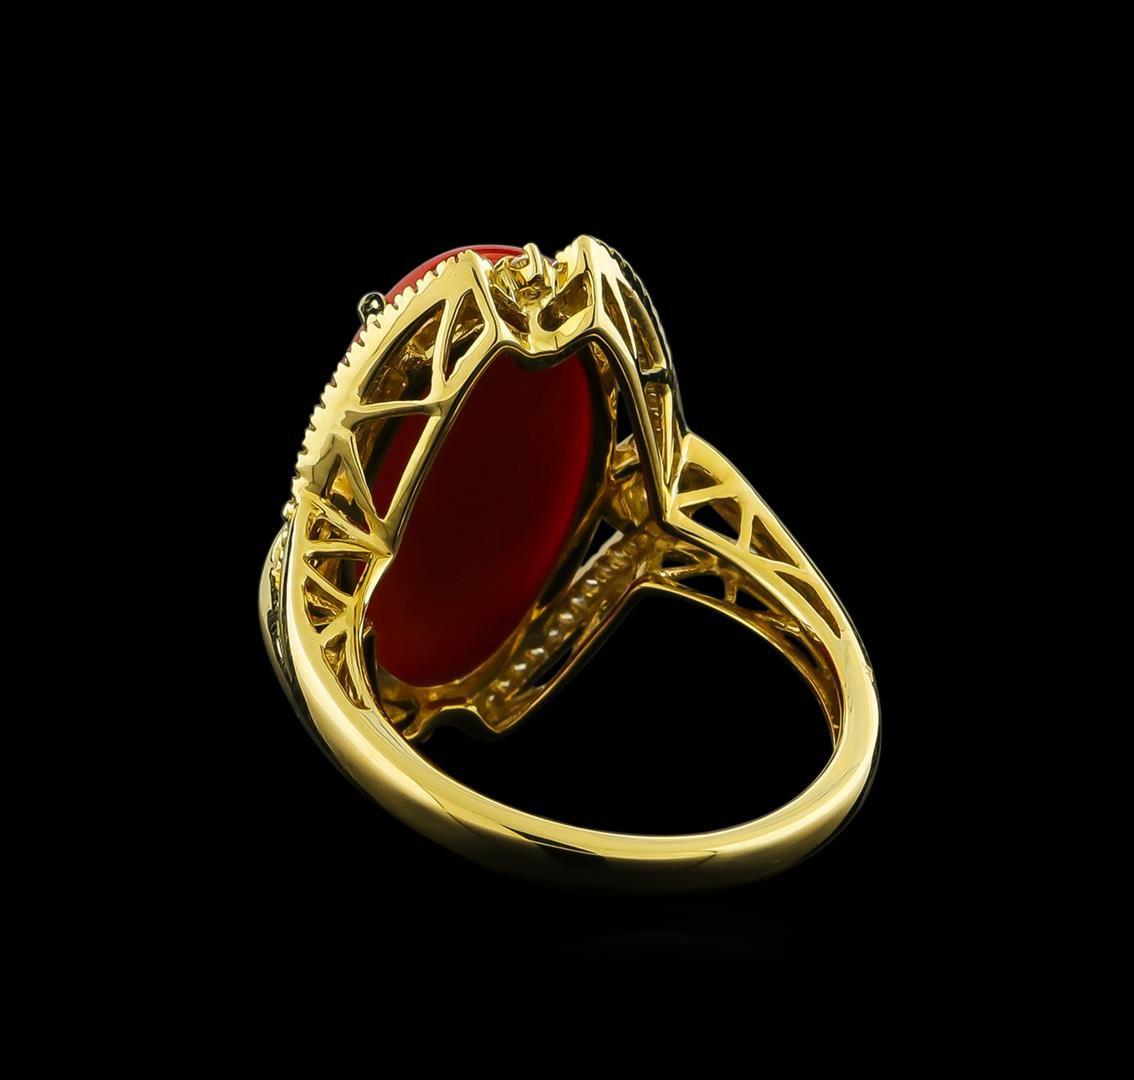 8.41 ctw Coral and Diamond Ring - 14KT Yellow Gold